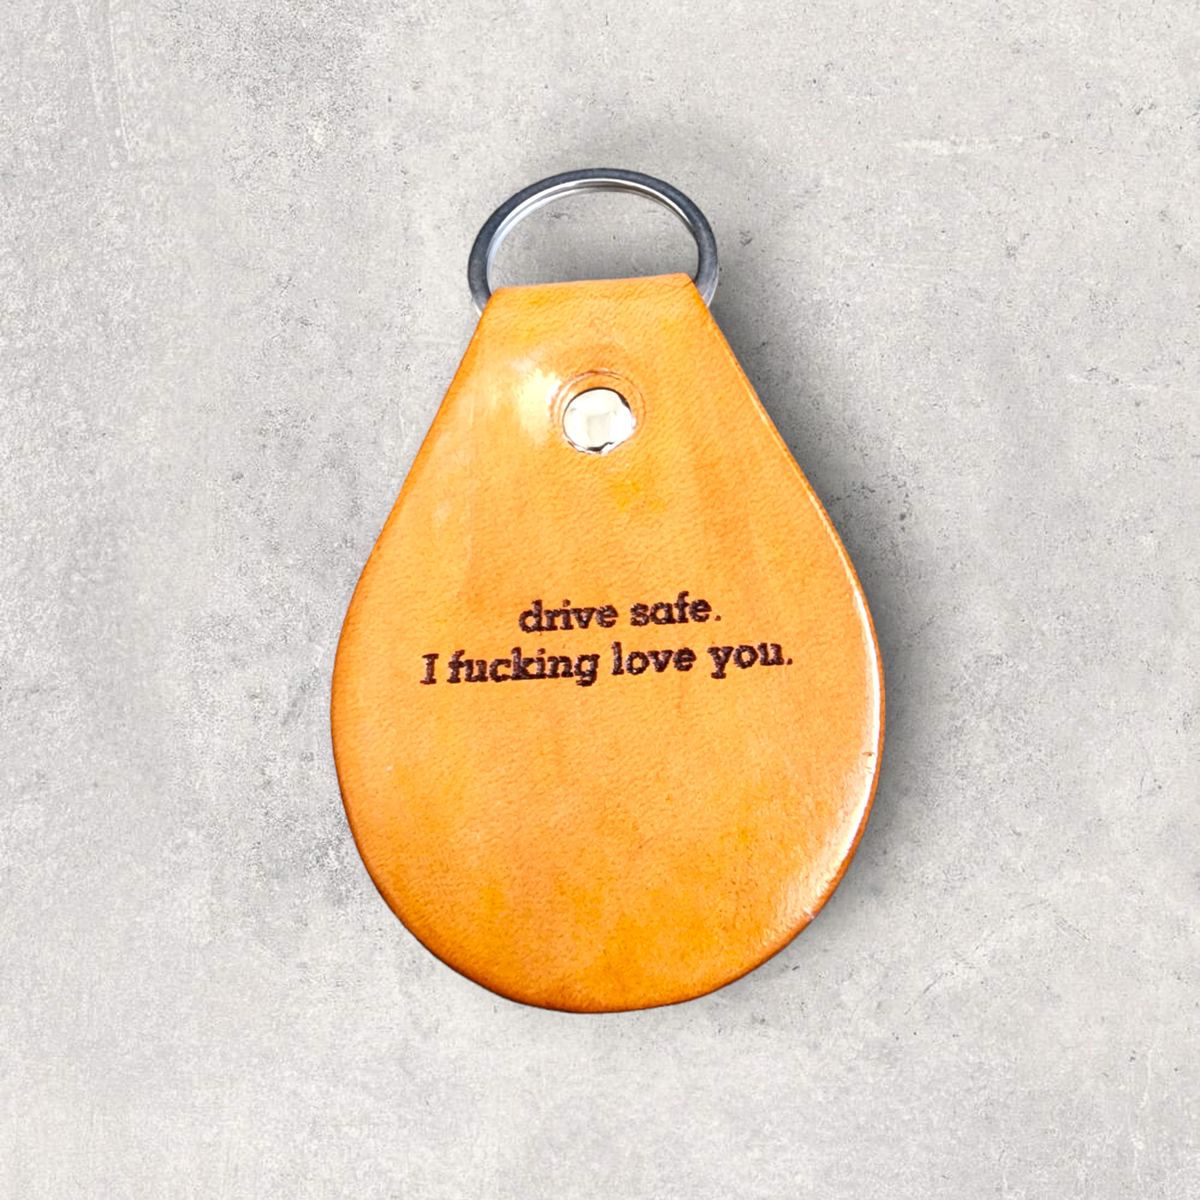 Engraved Leather Keychain -Drive safe. I fucking love you.